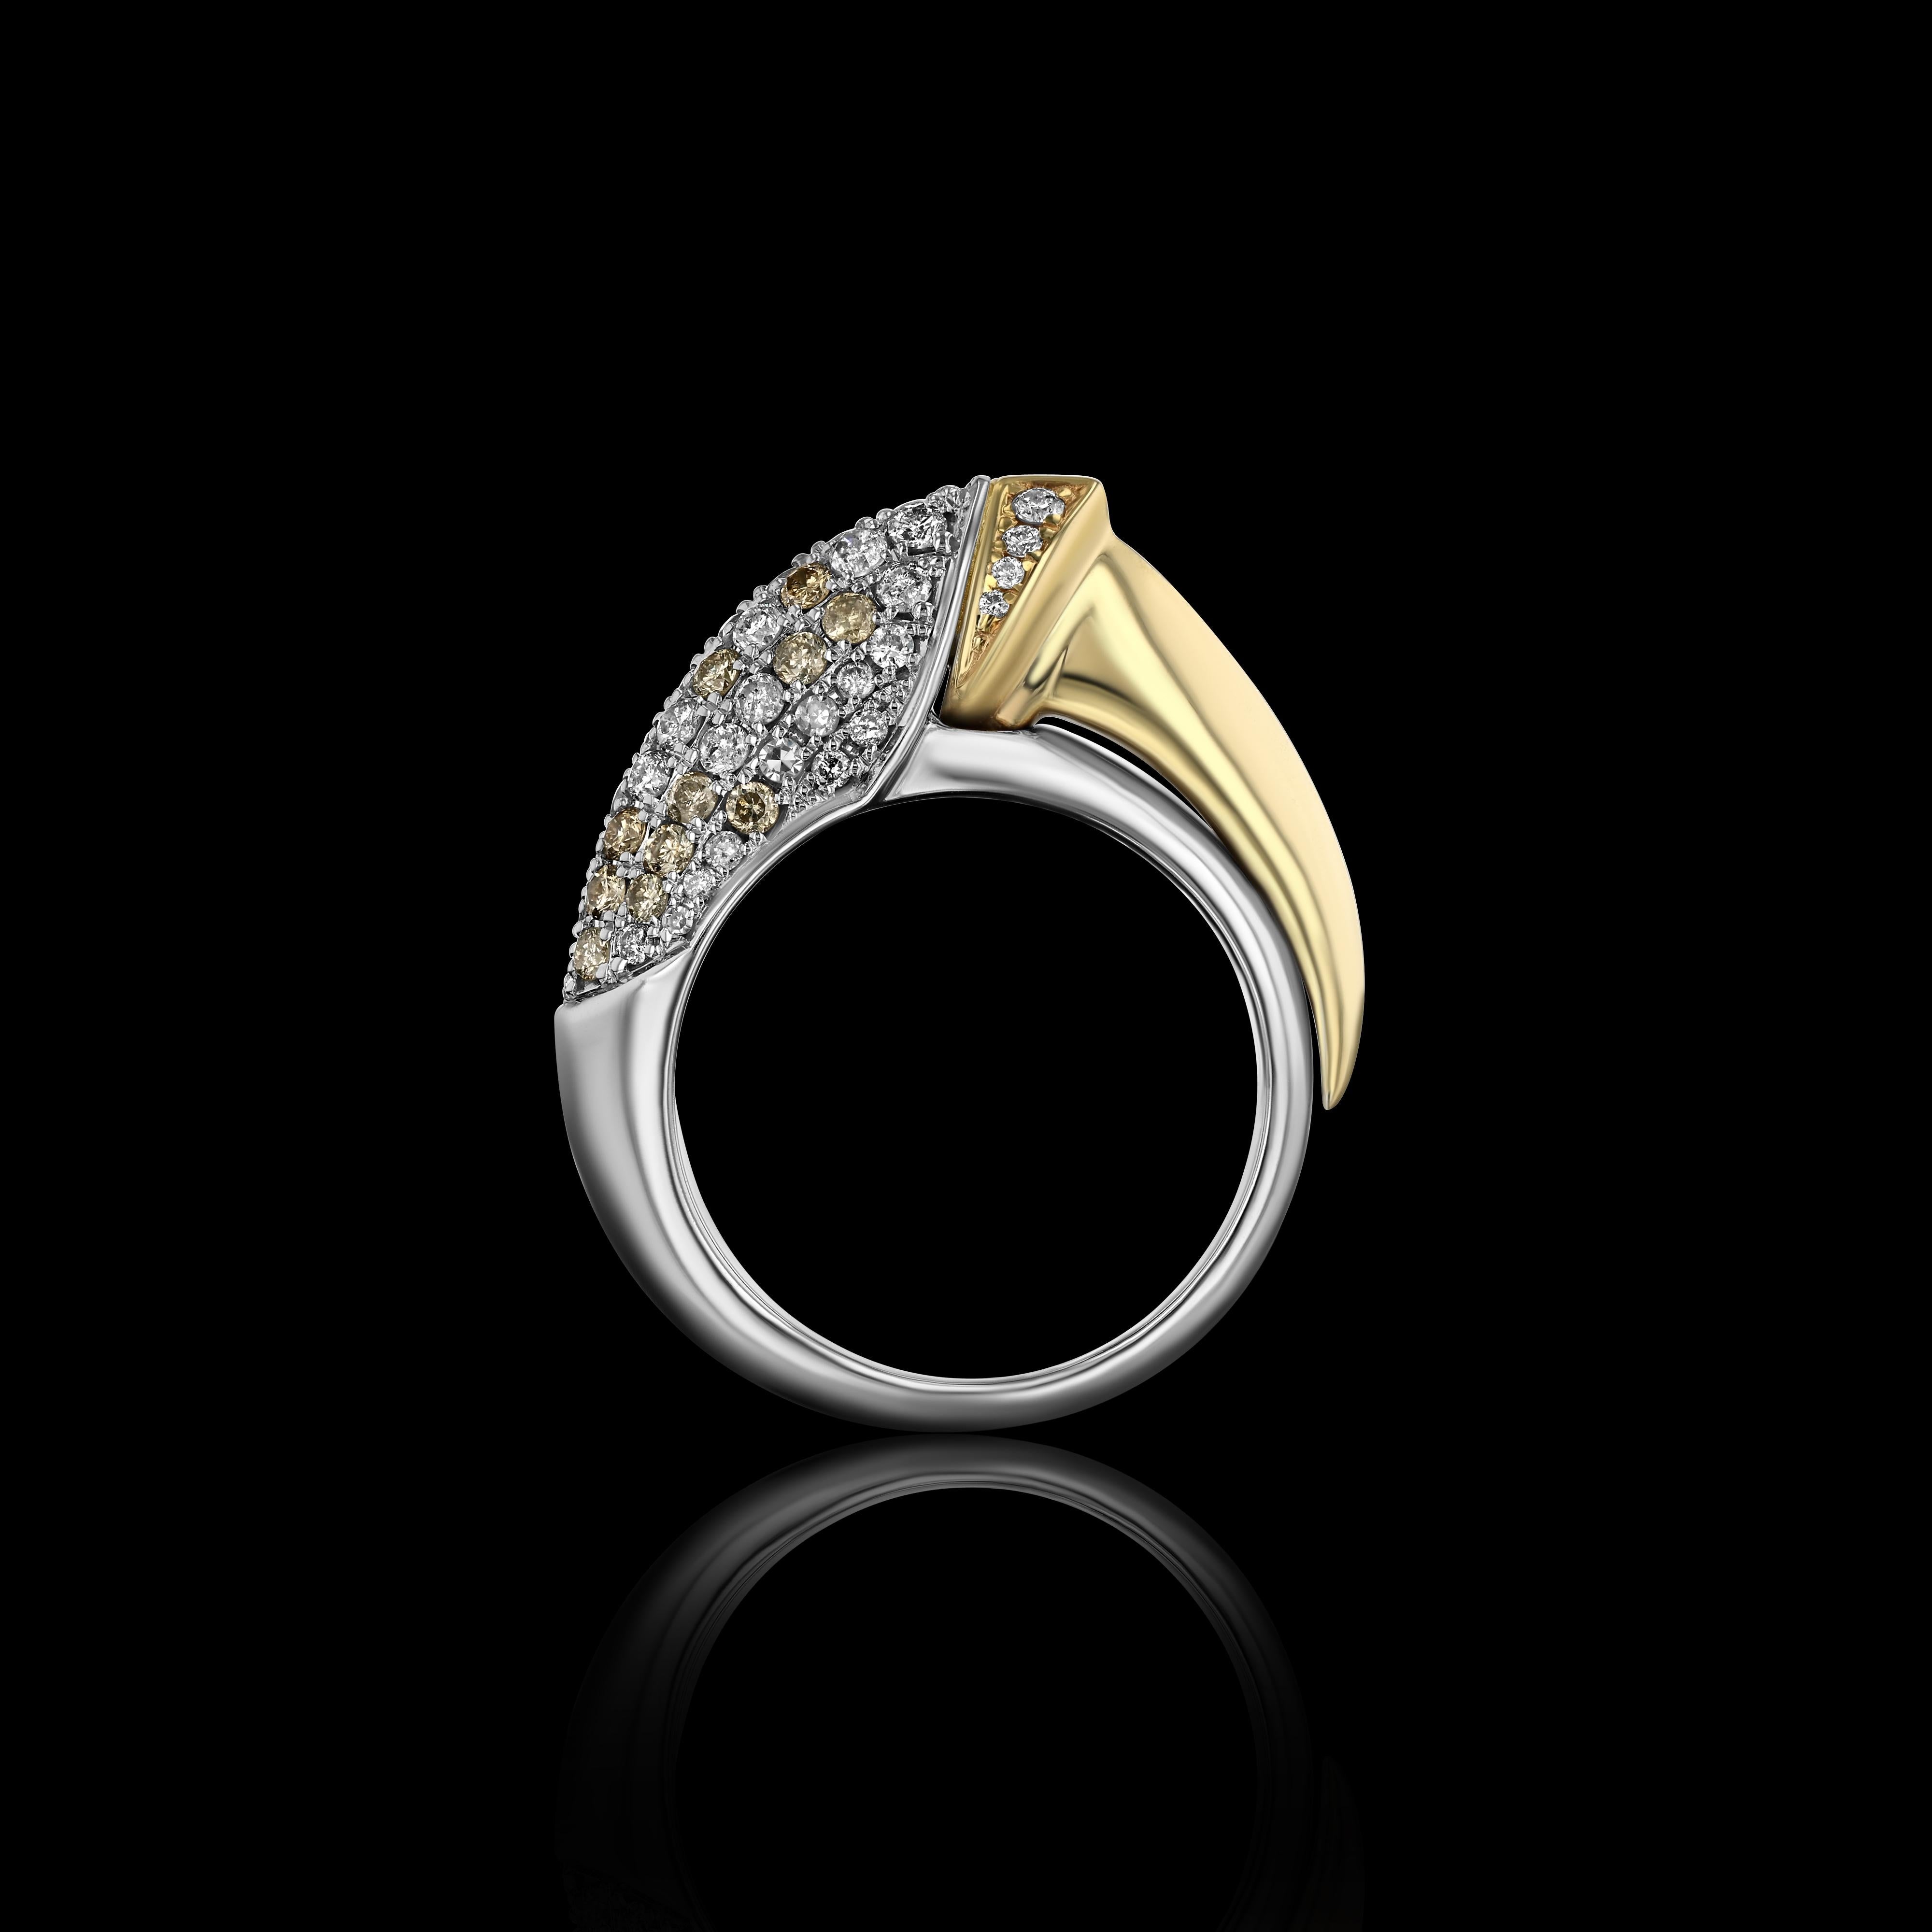 14k yellow and white gold, RAVN'S Claw Ring with 1.1ct champagne and white diamonds, from the House of RAVN Wild Heart Collection.